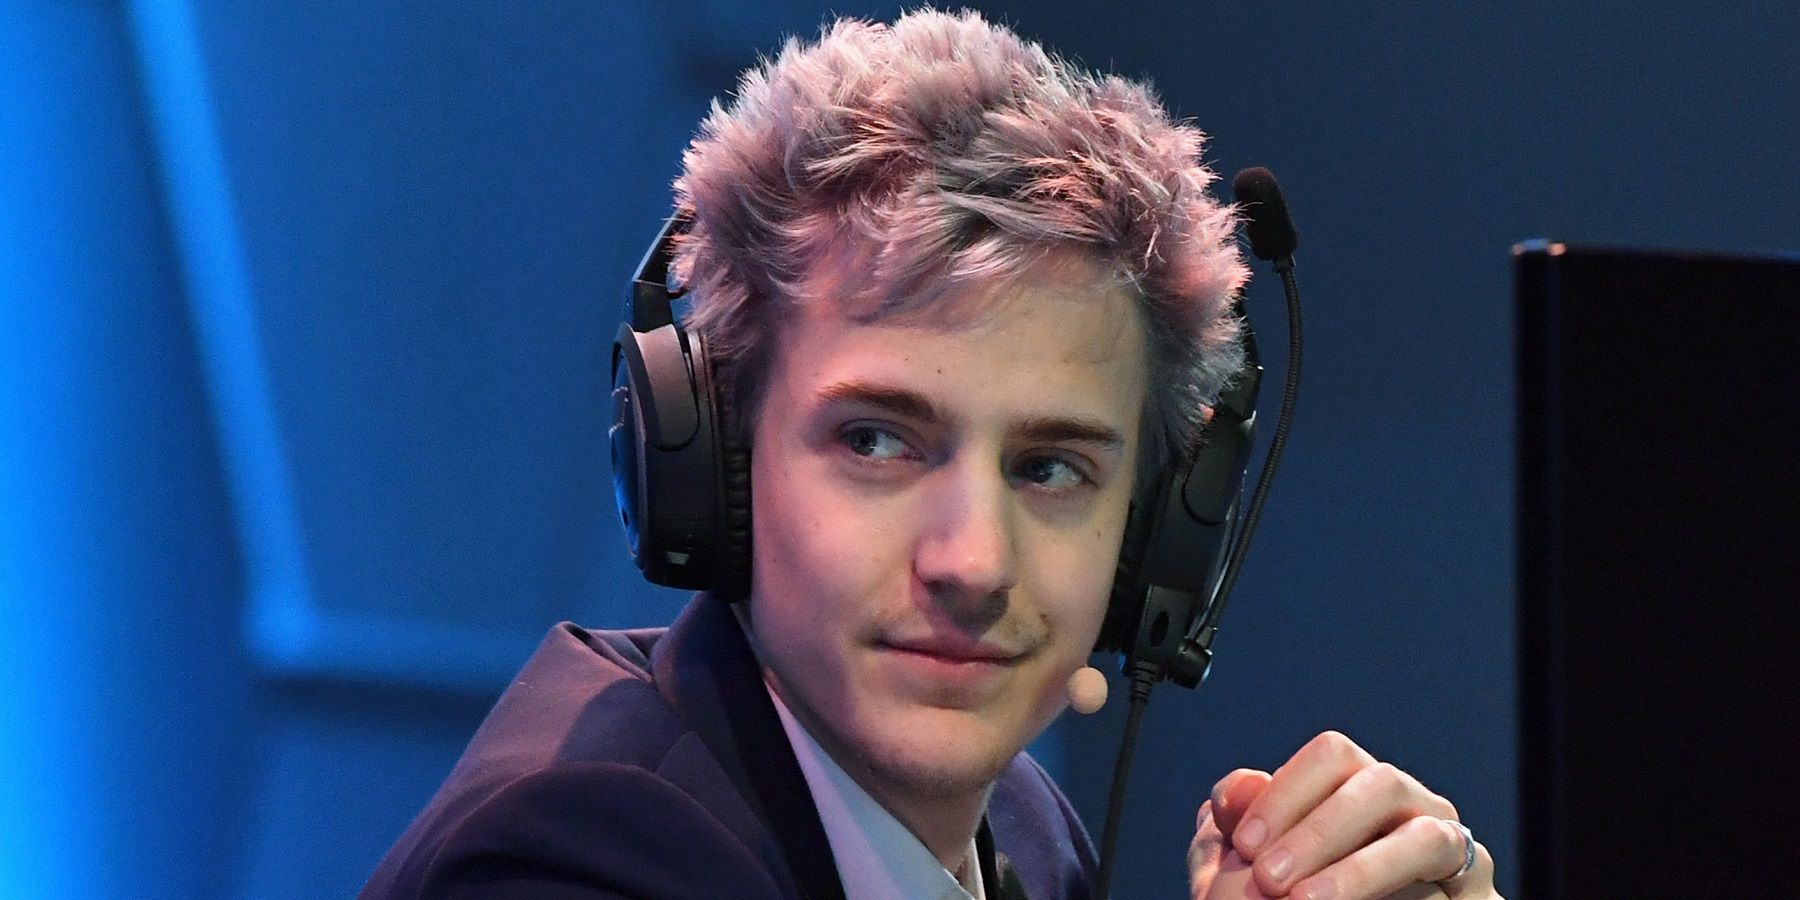 Ninja suggests new streamers are better off starting on smaller titles to build a brand.